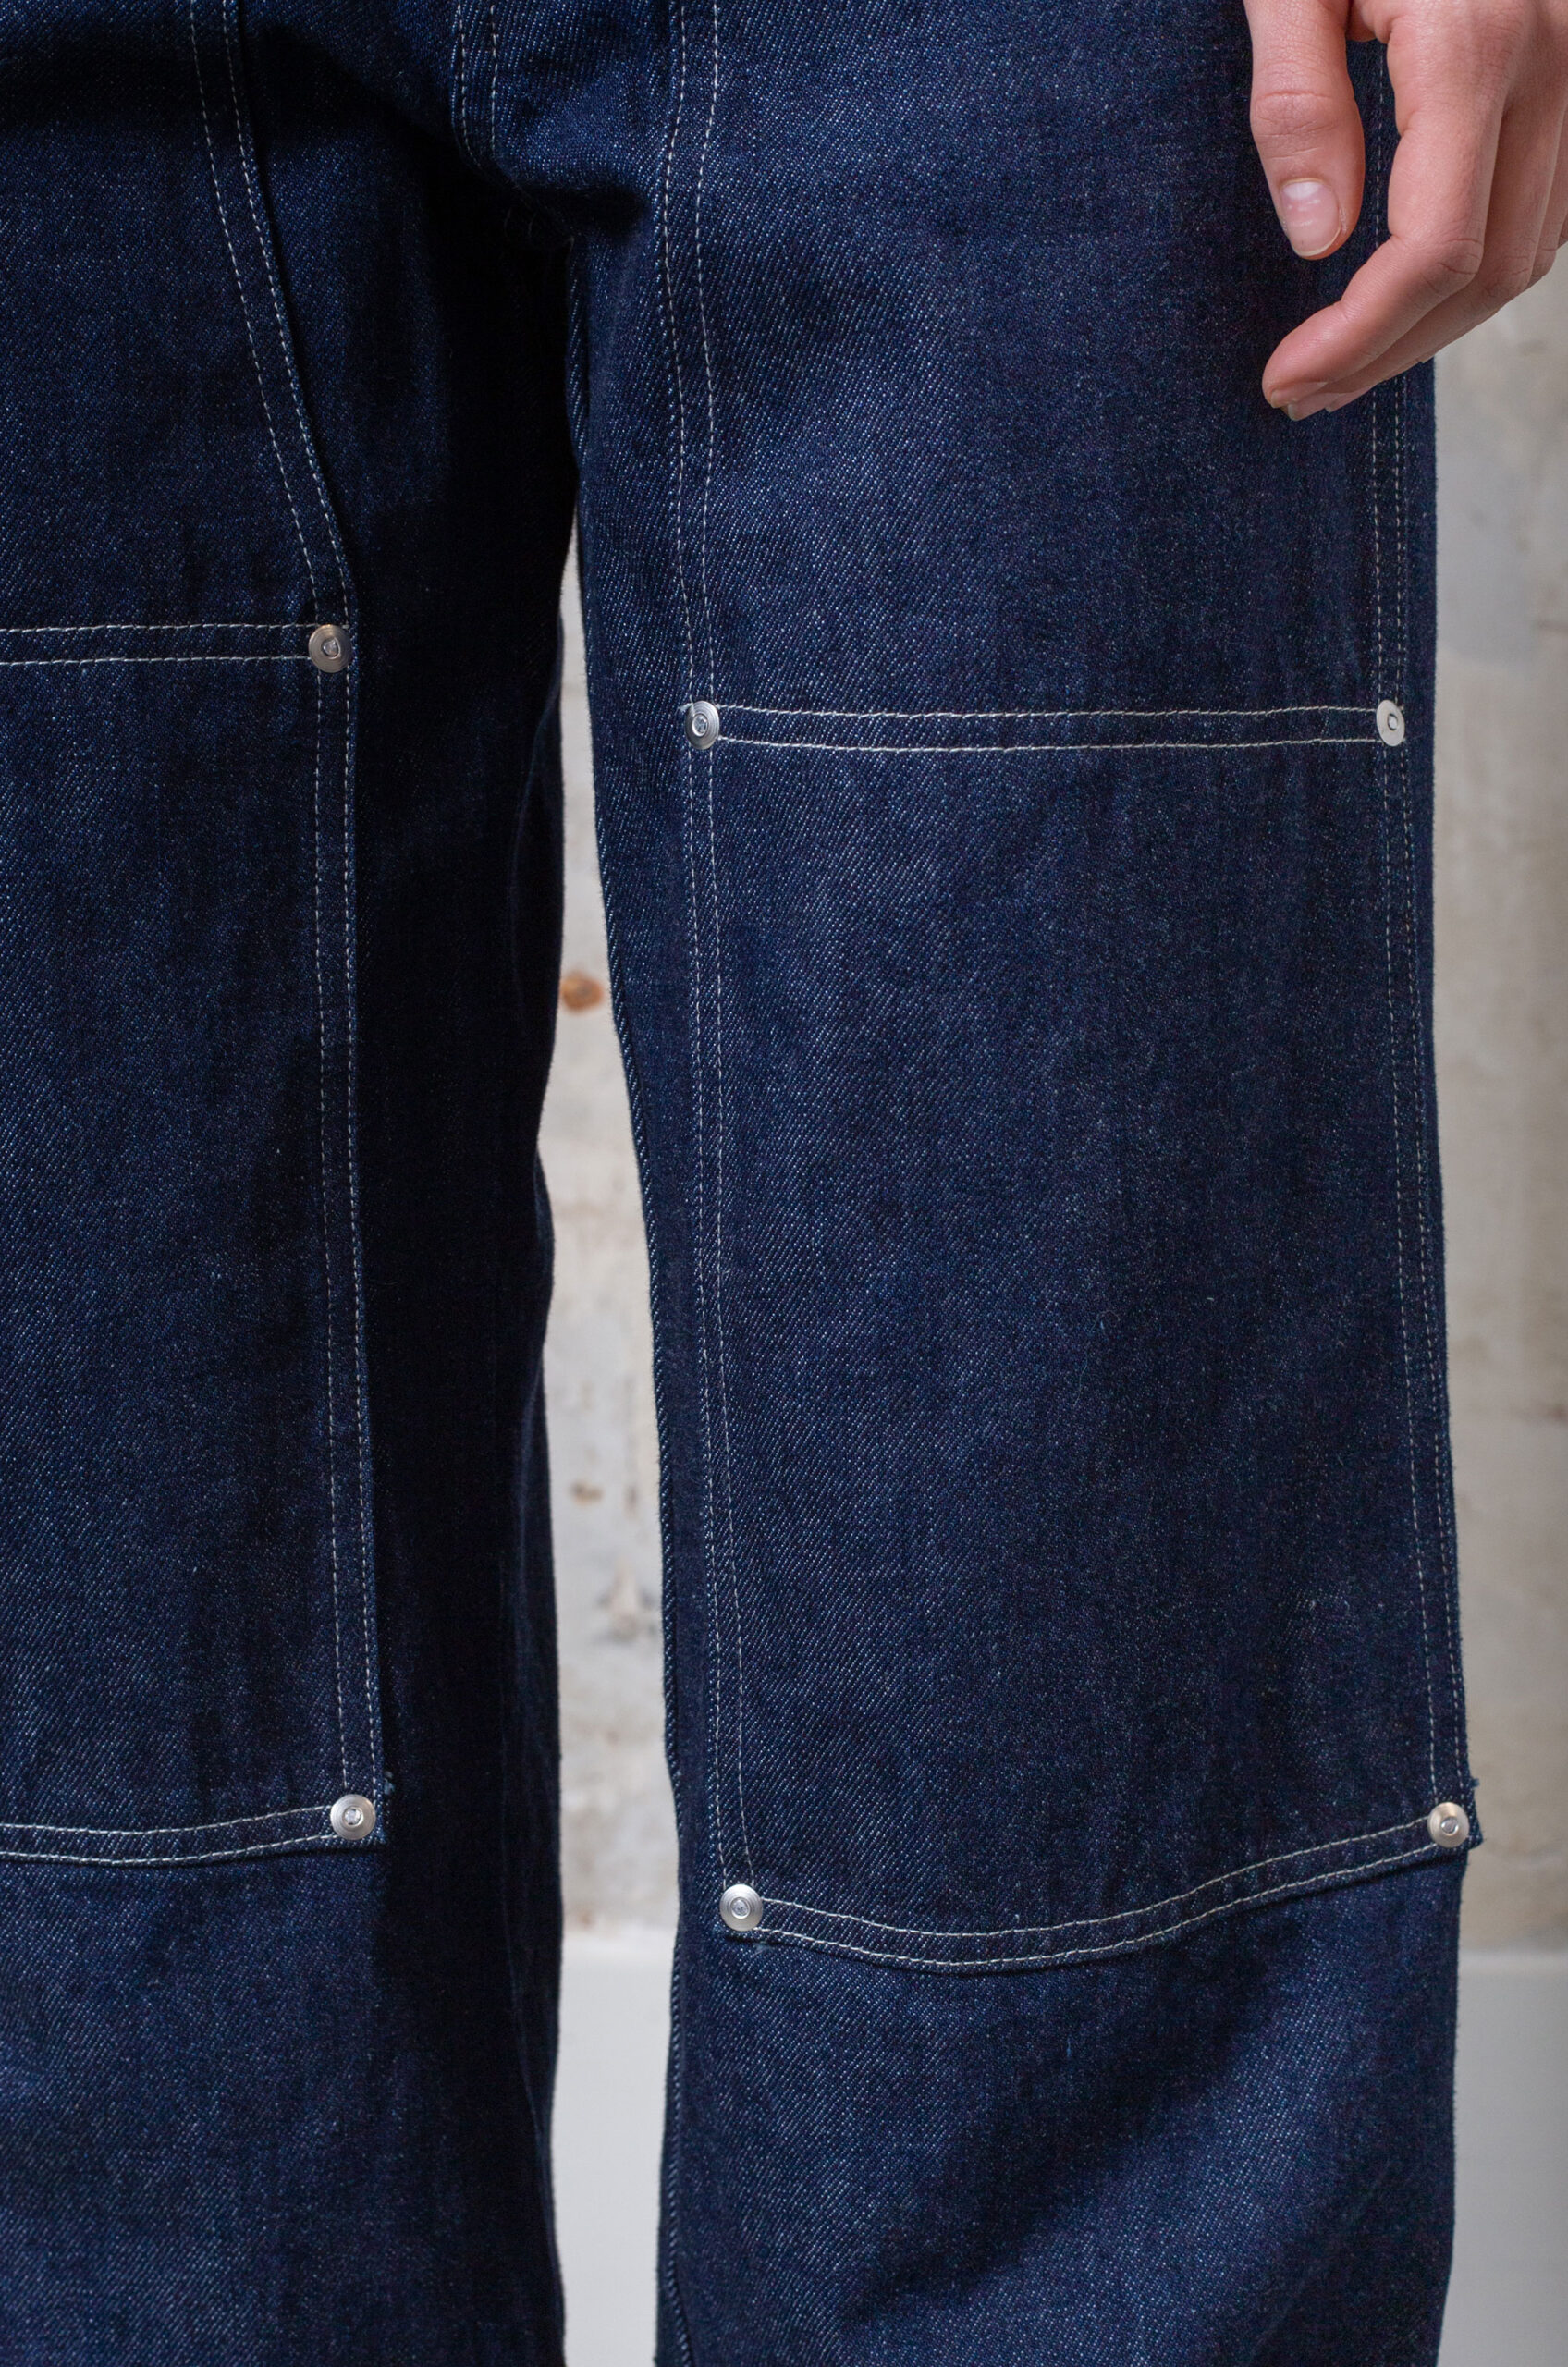 The Best Jeans for Carpenters | Tradify™